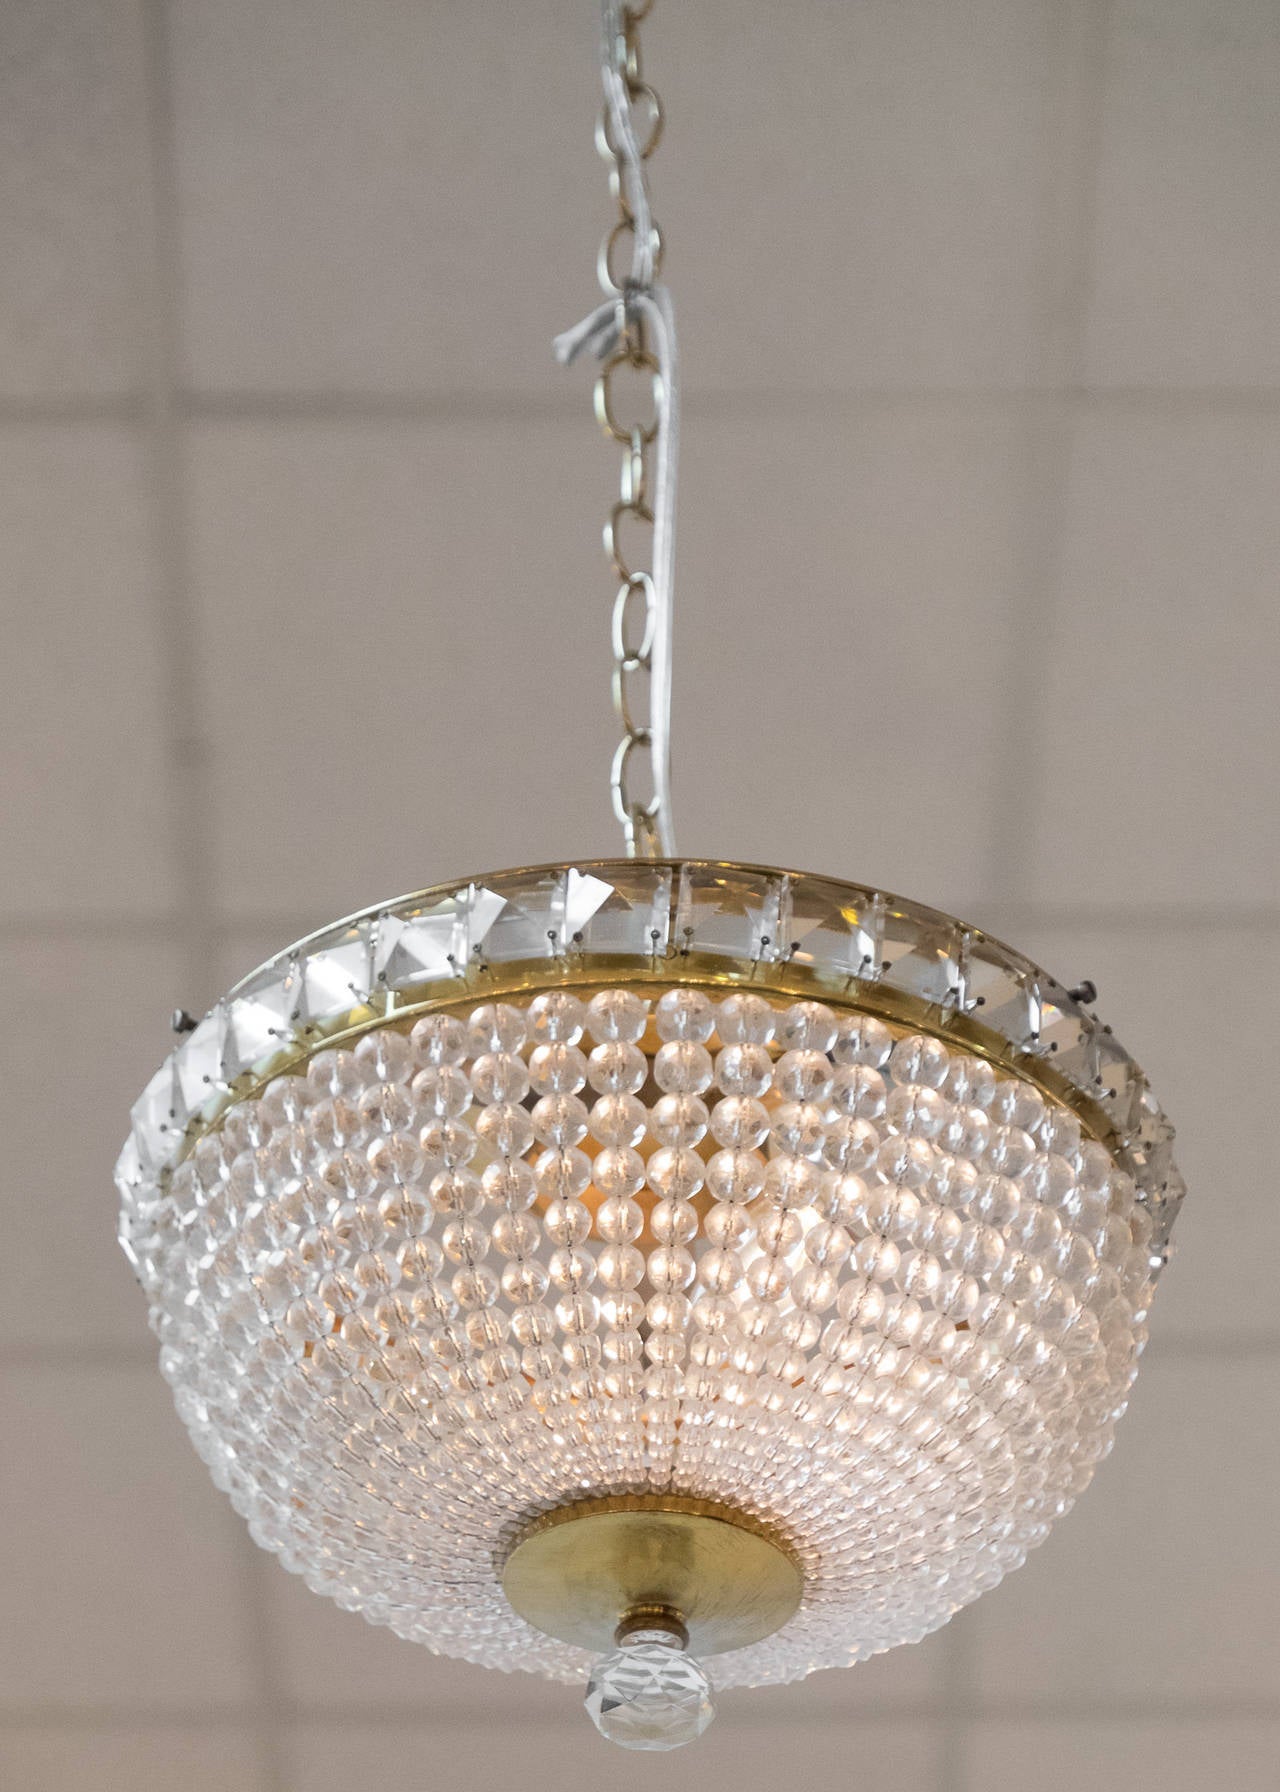 Early 20th Century French Empire Style Crystal Ceiling Fixtures